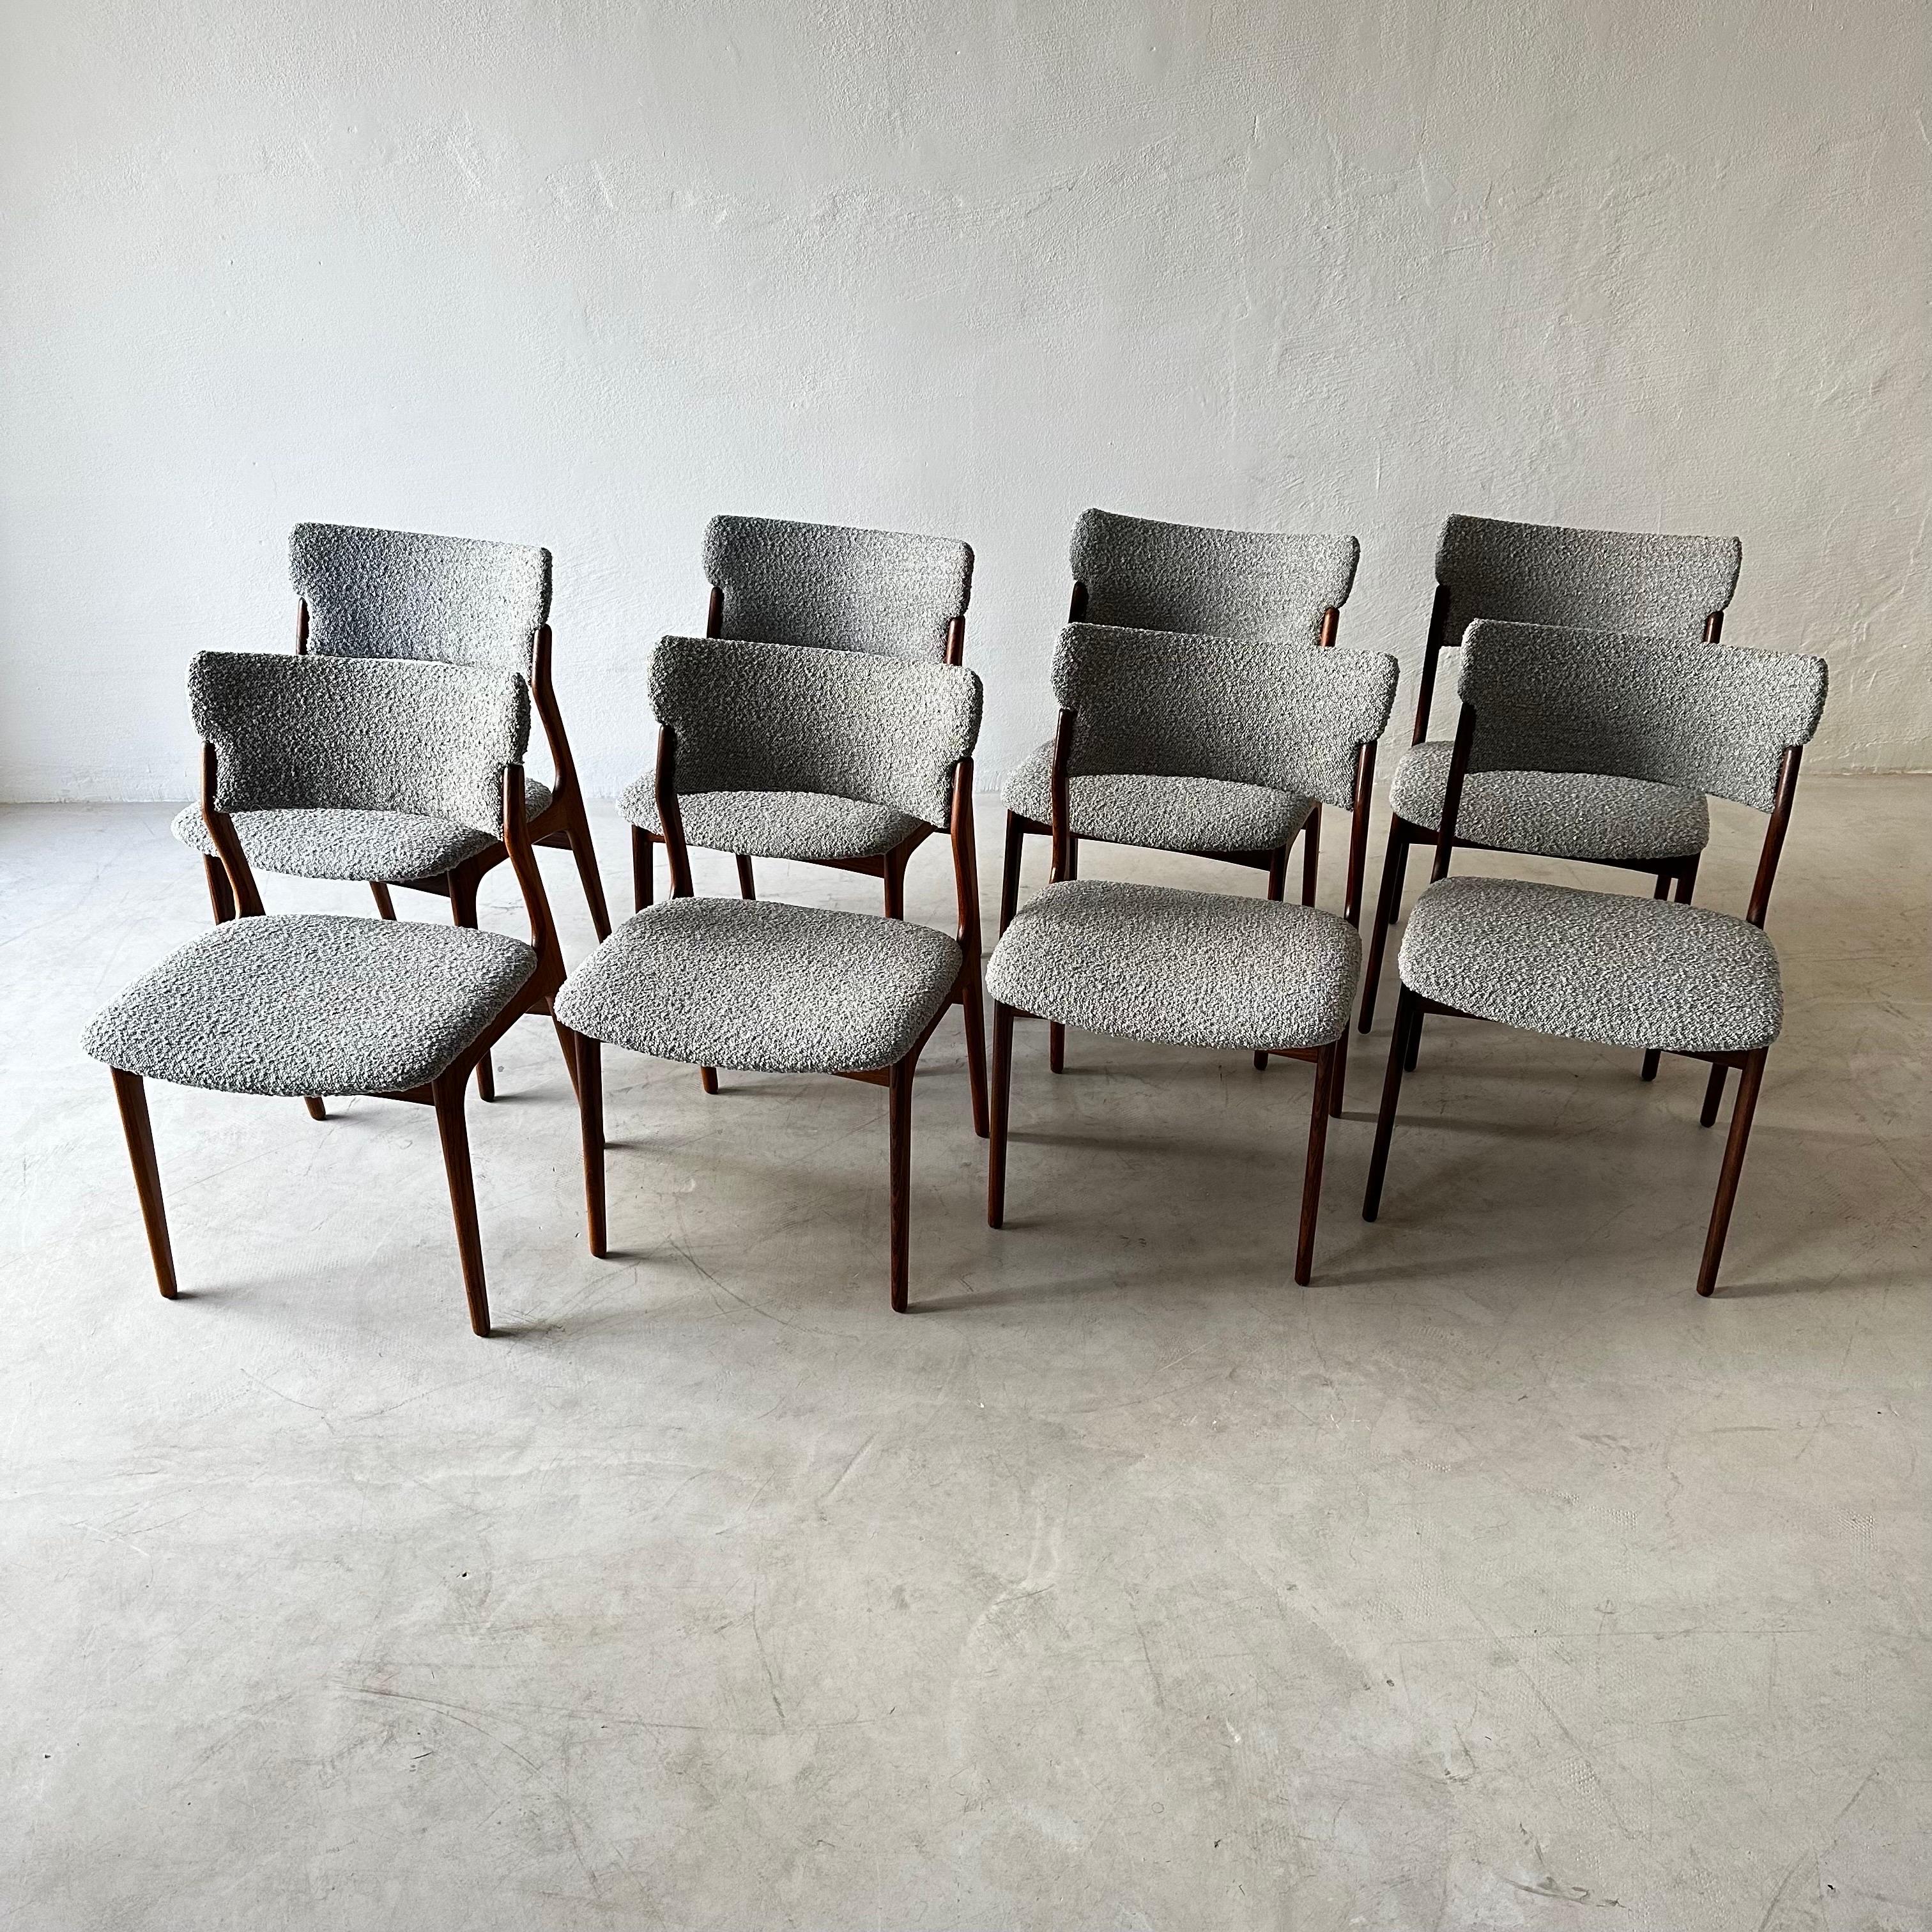 Rare set of 8 sculptural Scandinavian dining chairs, Denmark 1960s. Reupholstered in gray boucle fabric. Price is for one chair, up to eight are available.